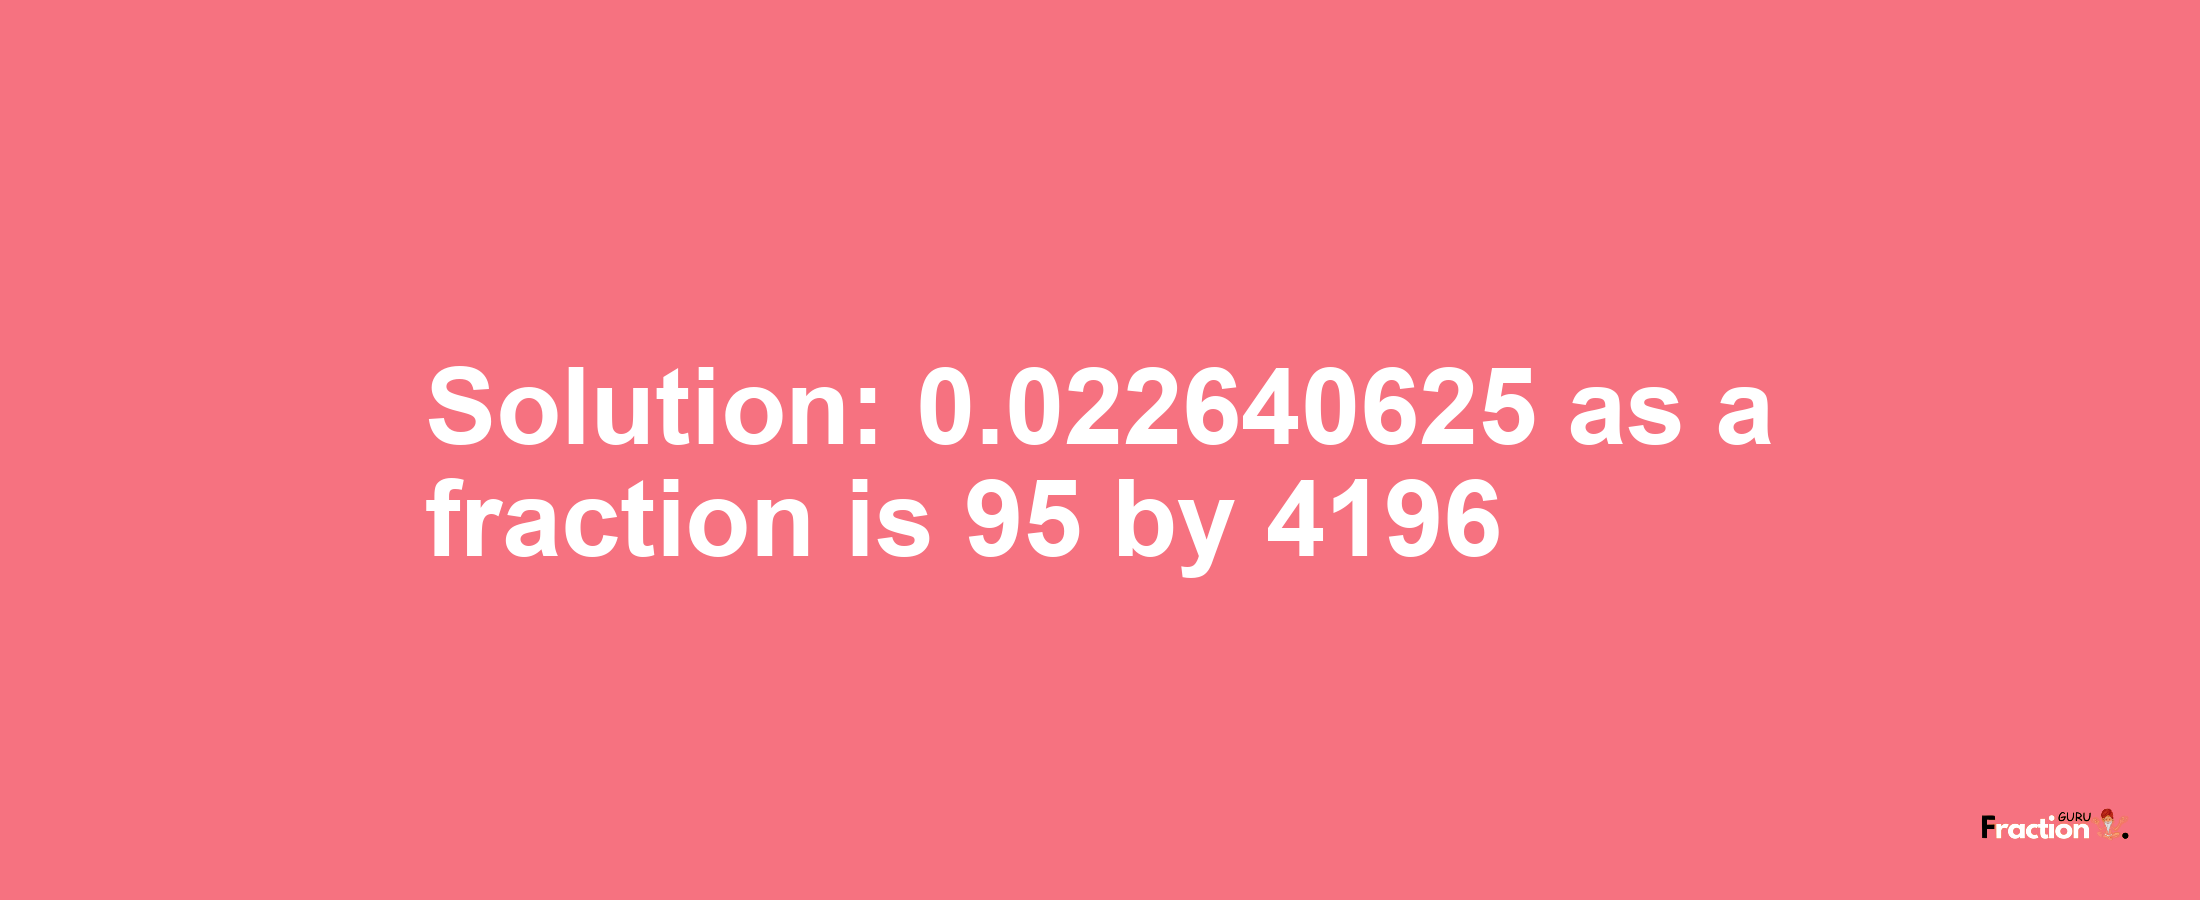 Solution:0.022640625 as a fraction is 95/4196